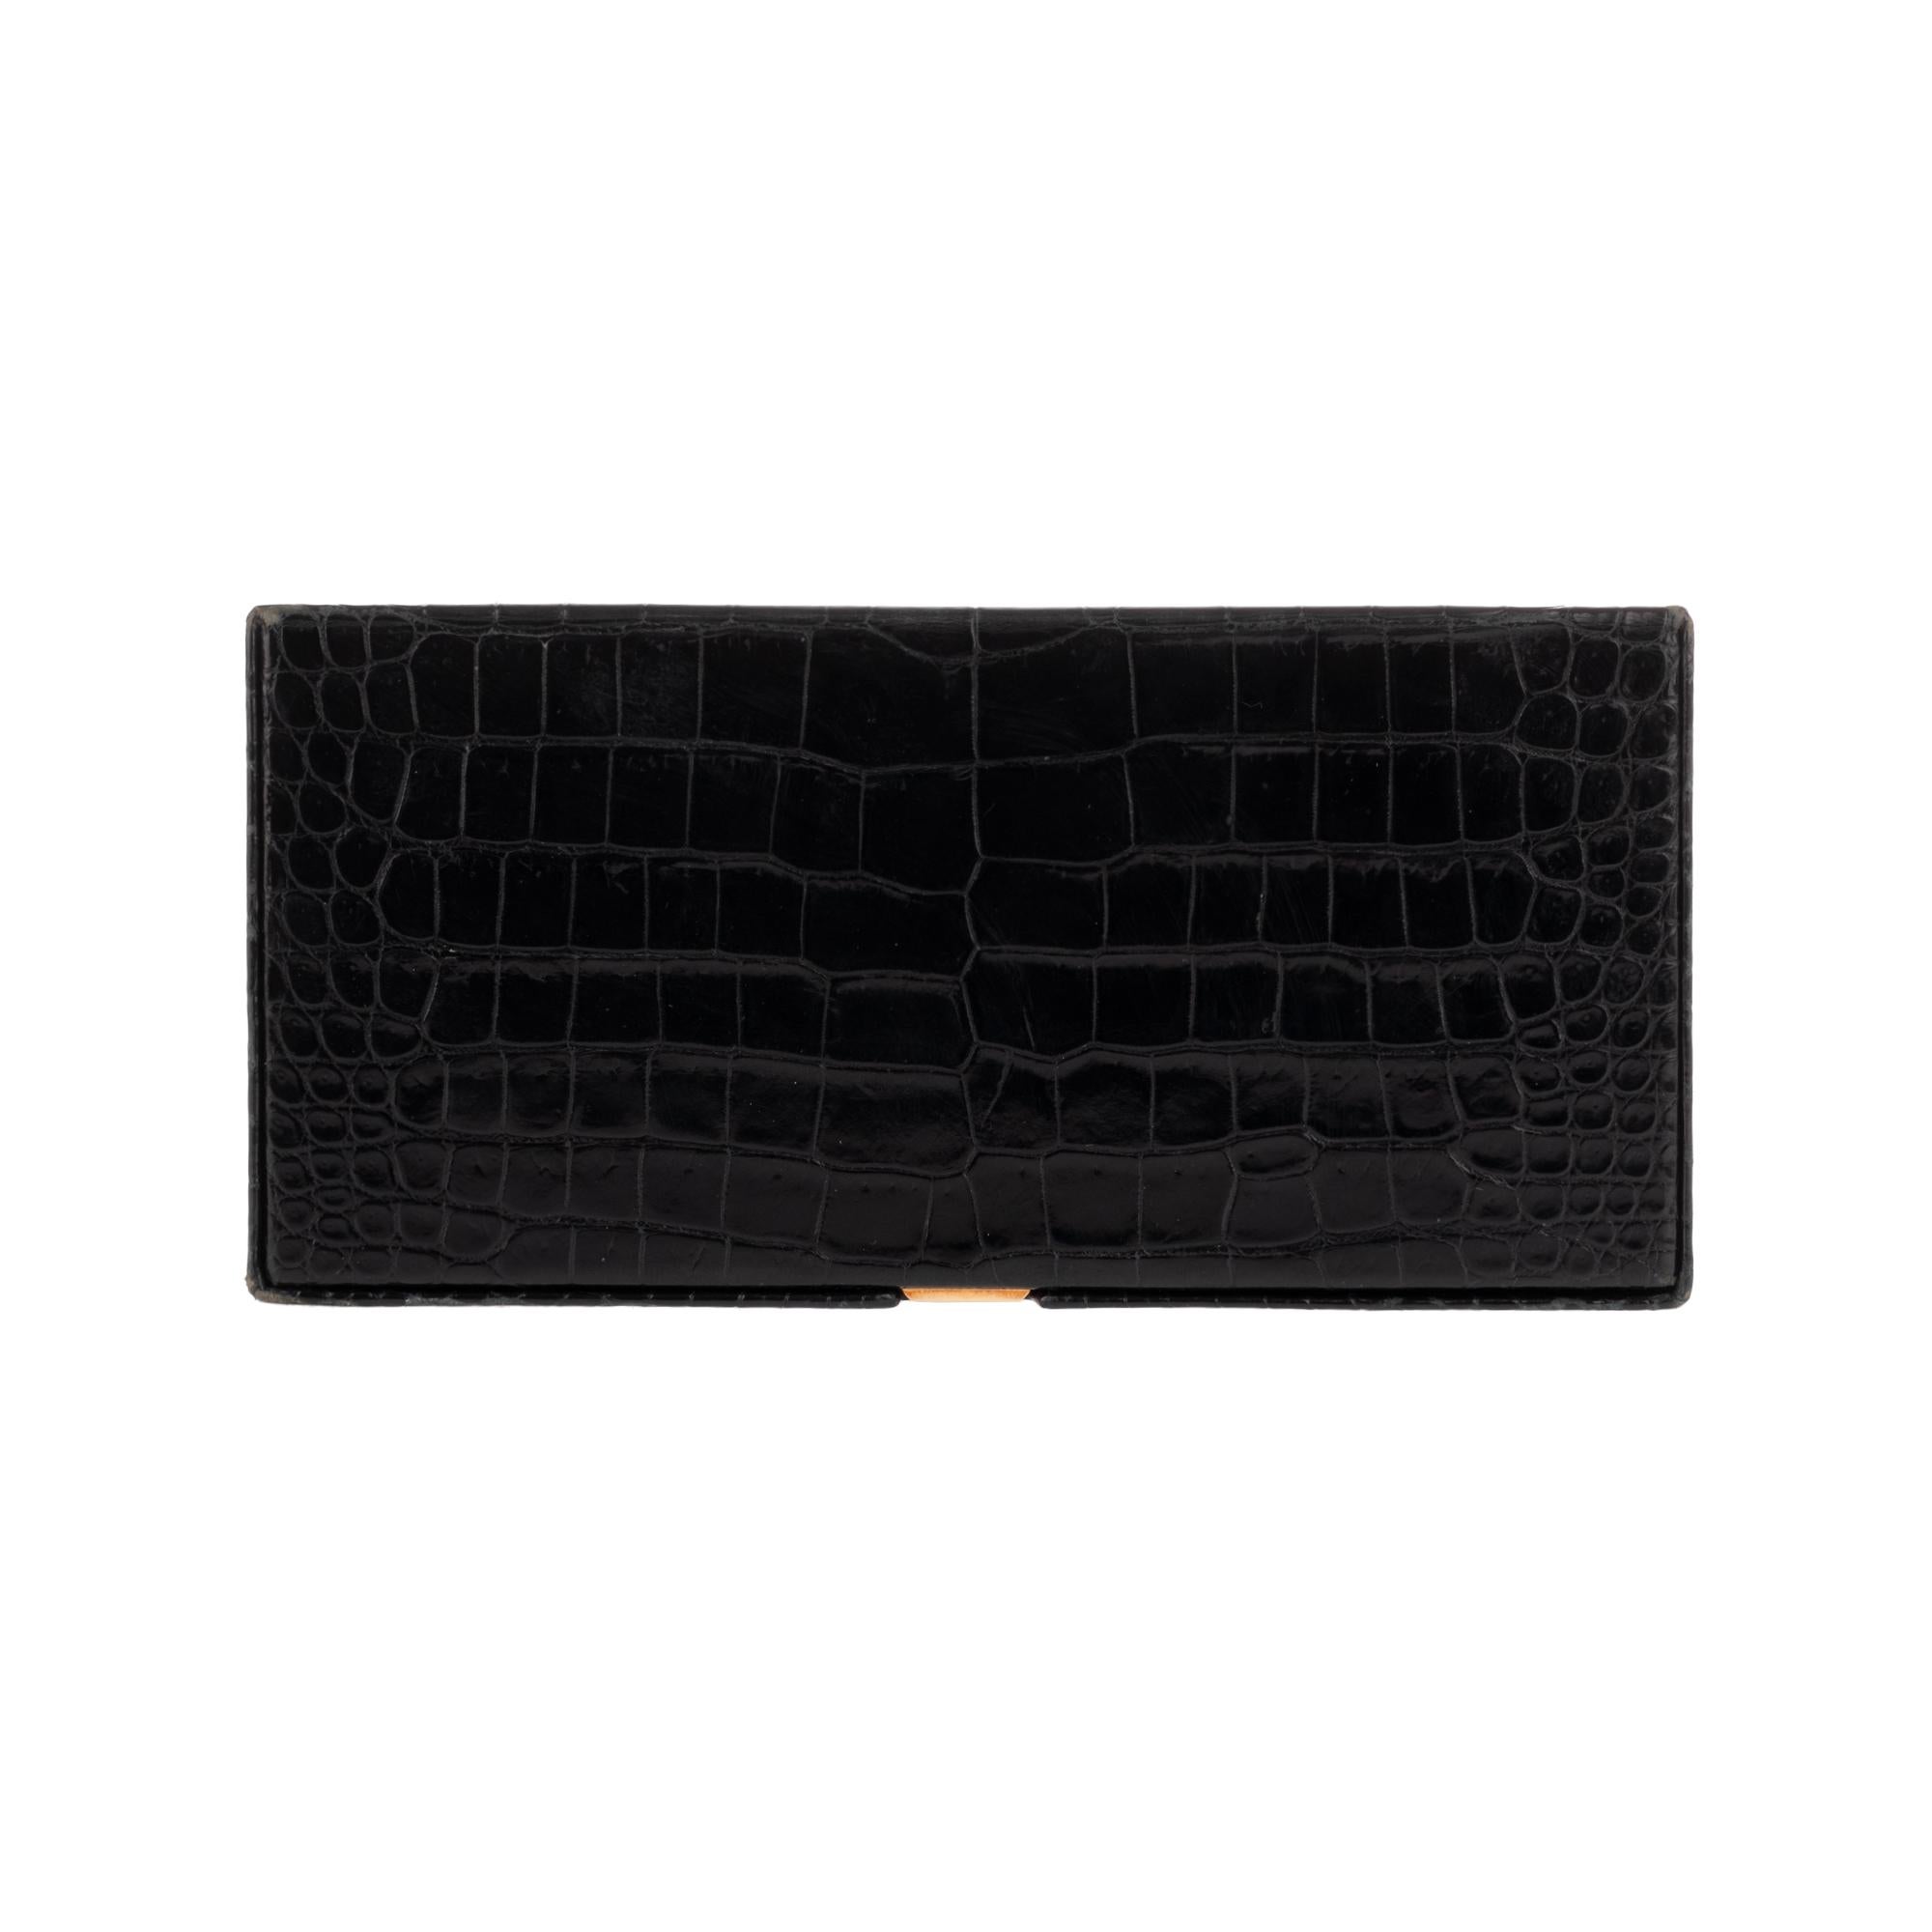 Hermès Vintage rectangular cigarette box in black crocodile.
Gold plated metal coupling.
Opening by press clasp on the hood.
Interior: 2 cigarette compartments with black leather strap to hold cigarettes.
